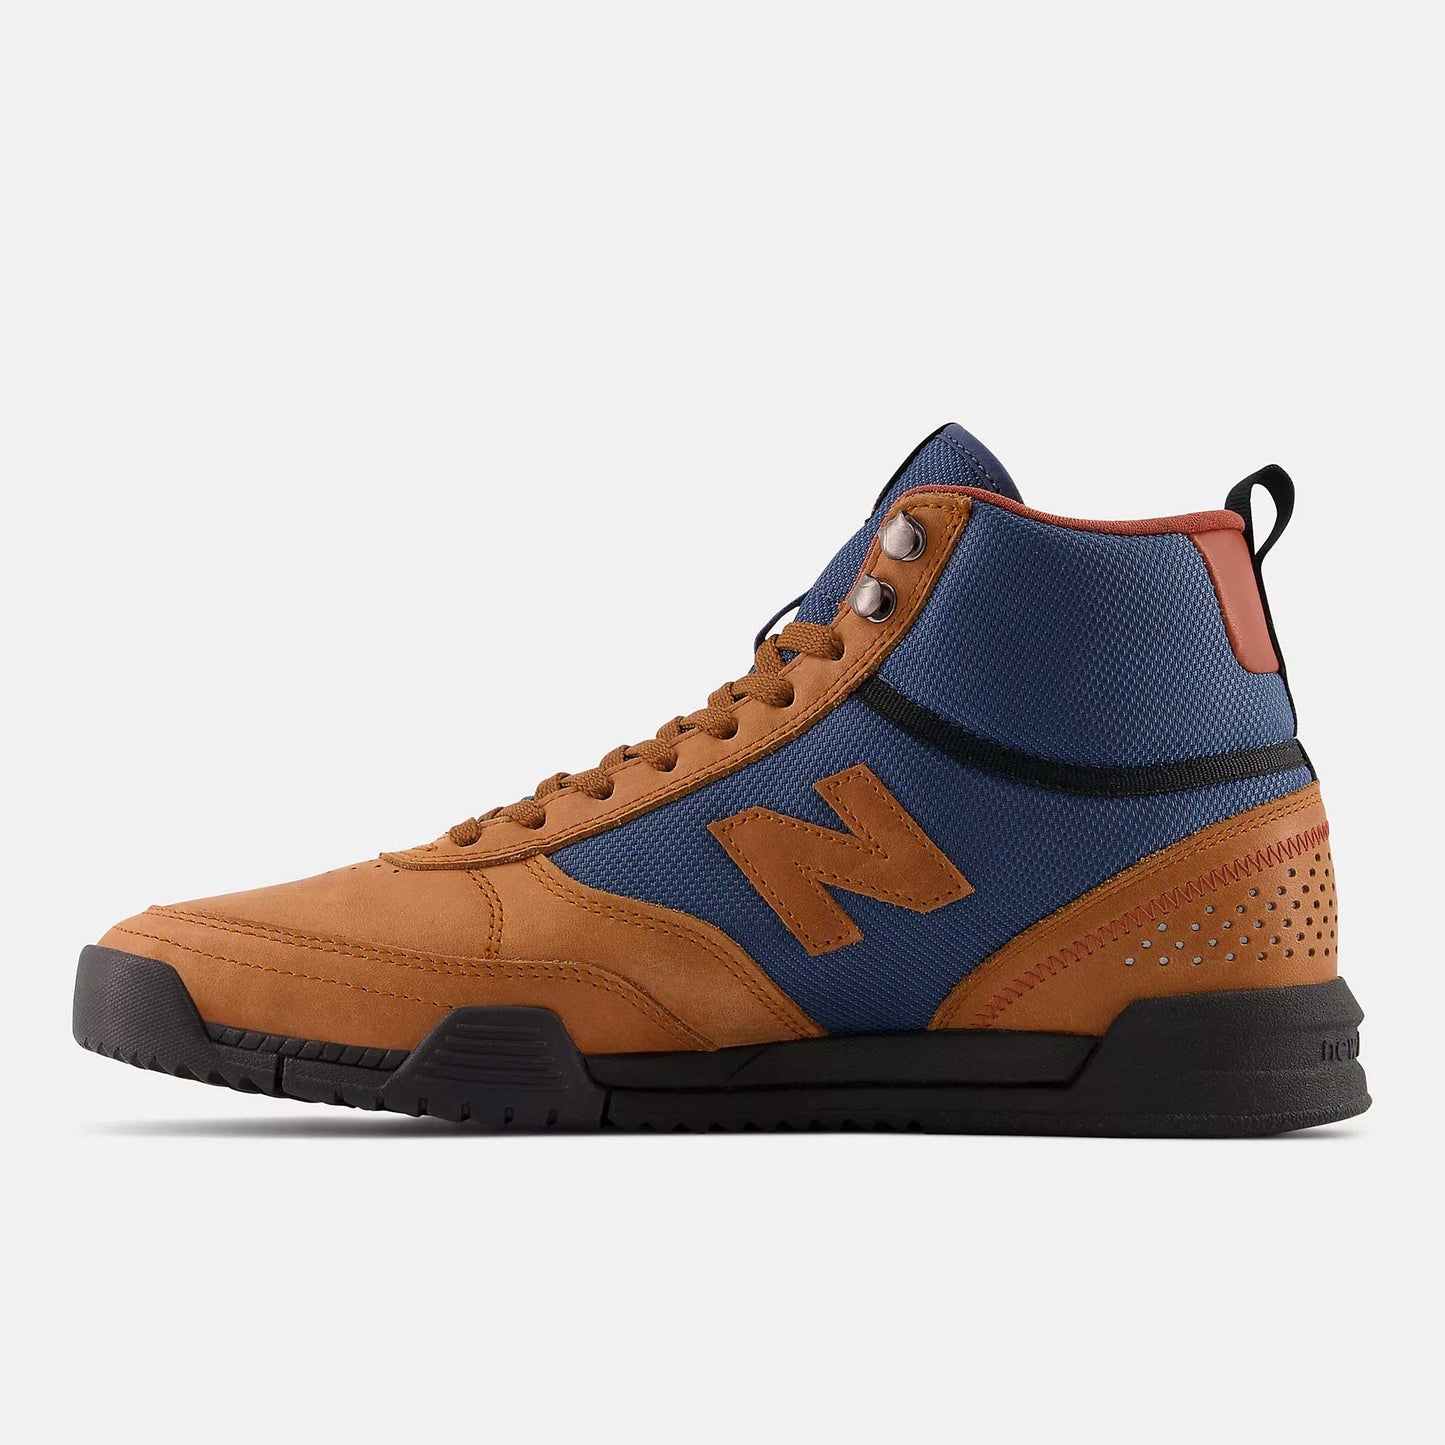 New Balance Numeric 440 Trail, brown with navy - Tiki Room Skateboards - 6